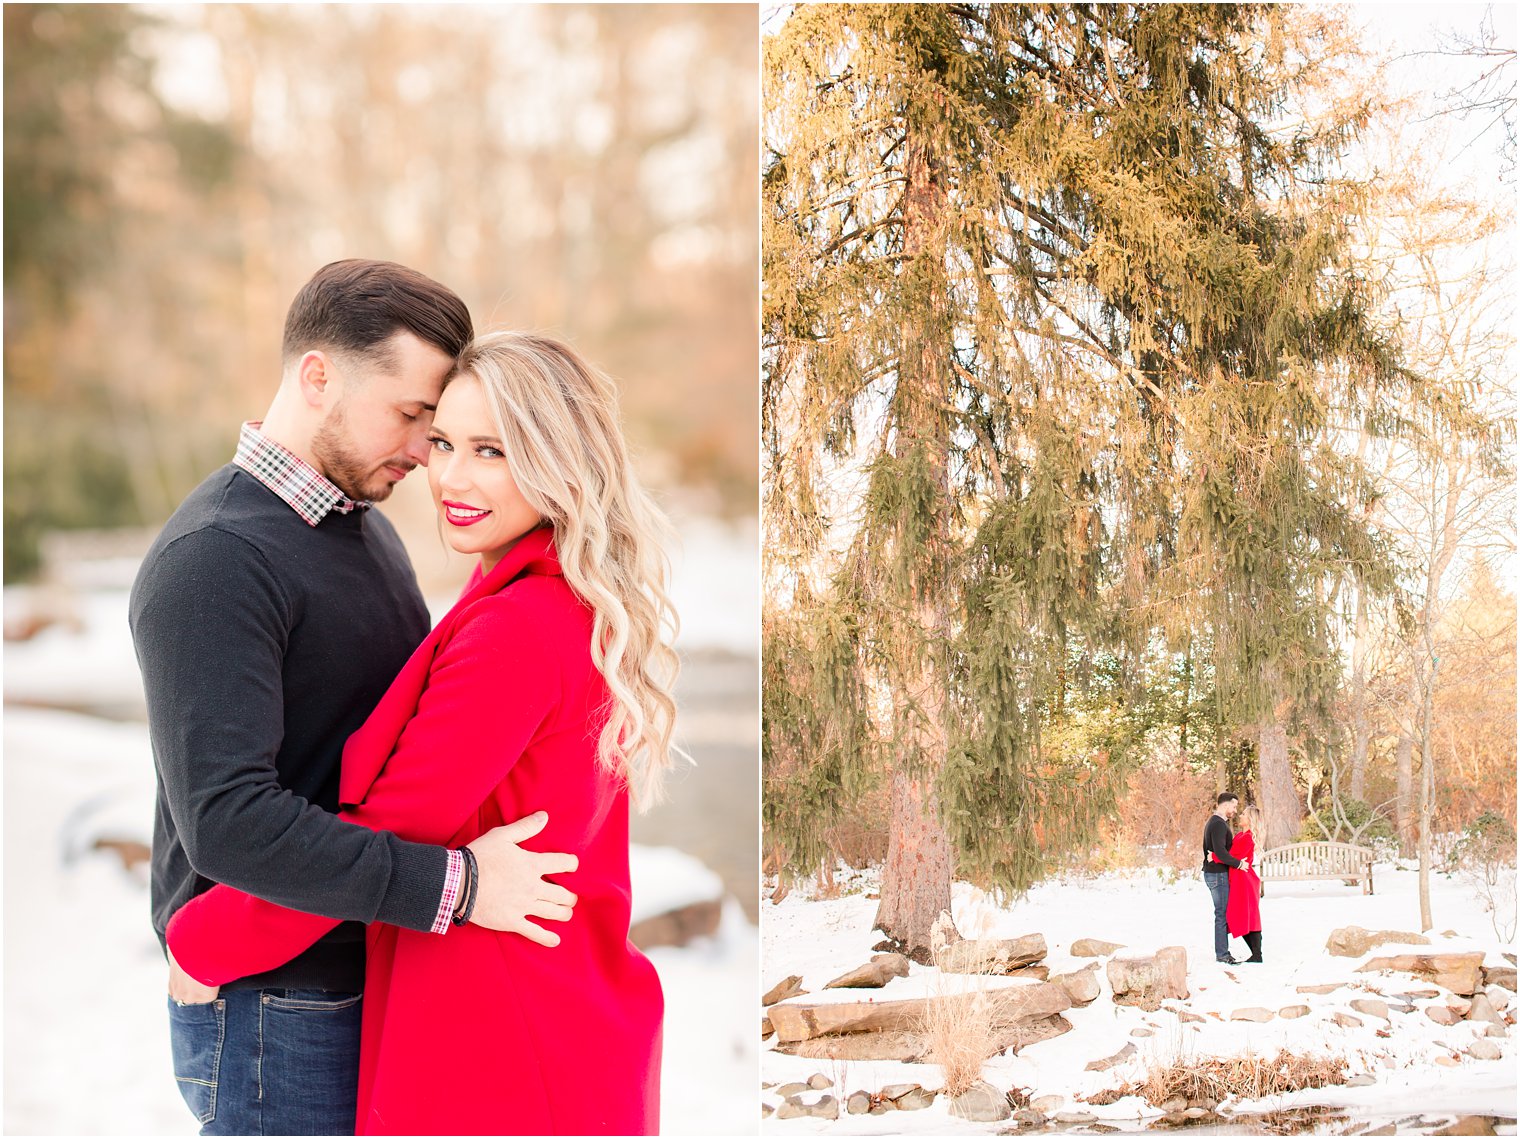 Romantic wintry engagement photos with a bride wearing a red coat